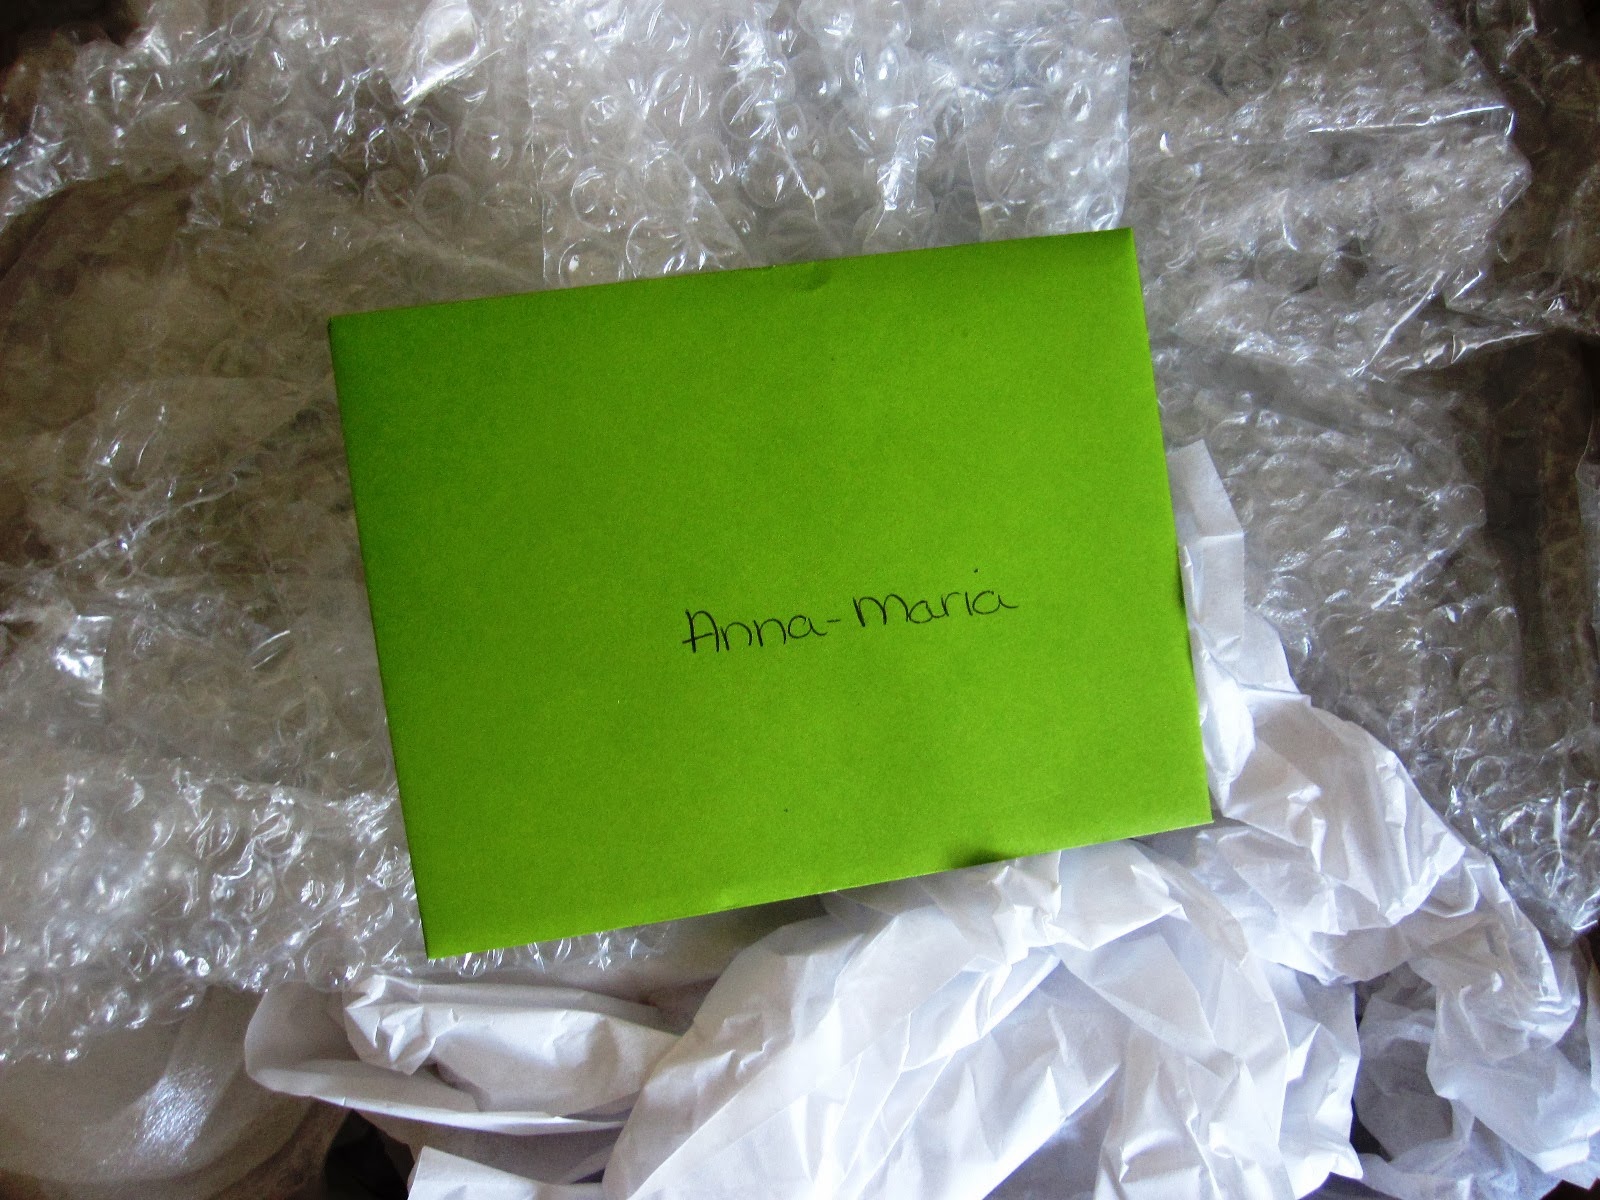 Inside of swap parcel, showing bubble wrap and an envelope with Anna-Maria written on it